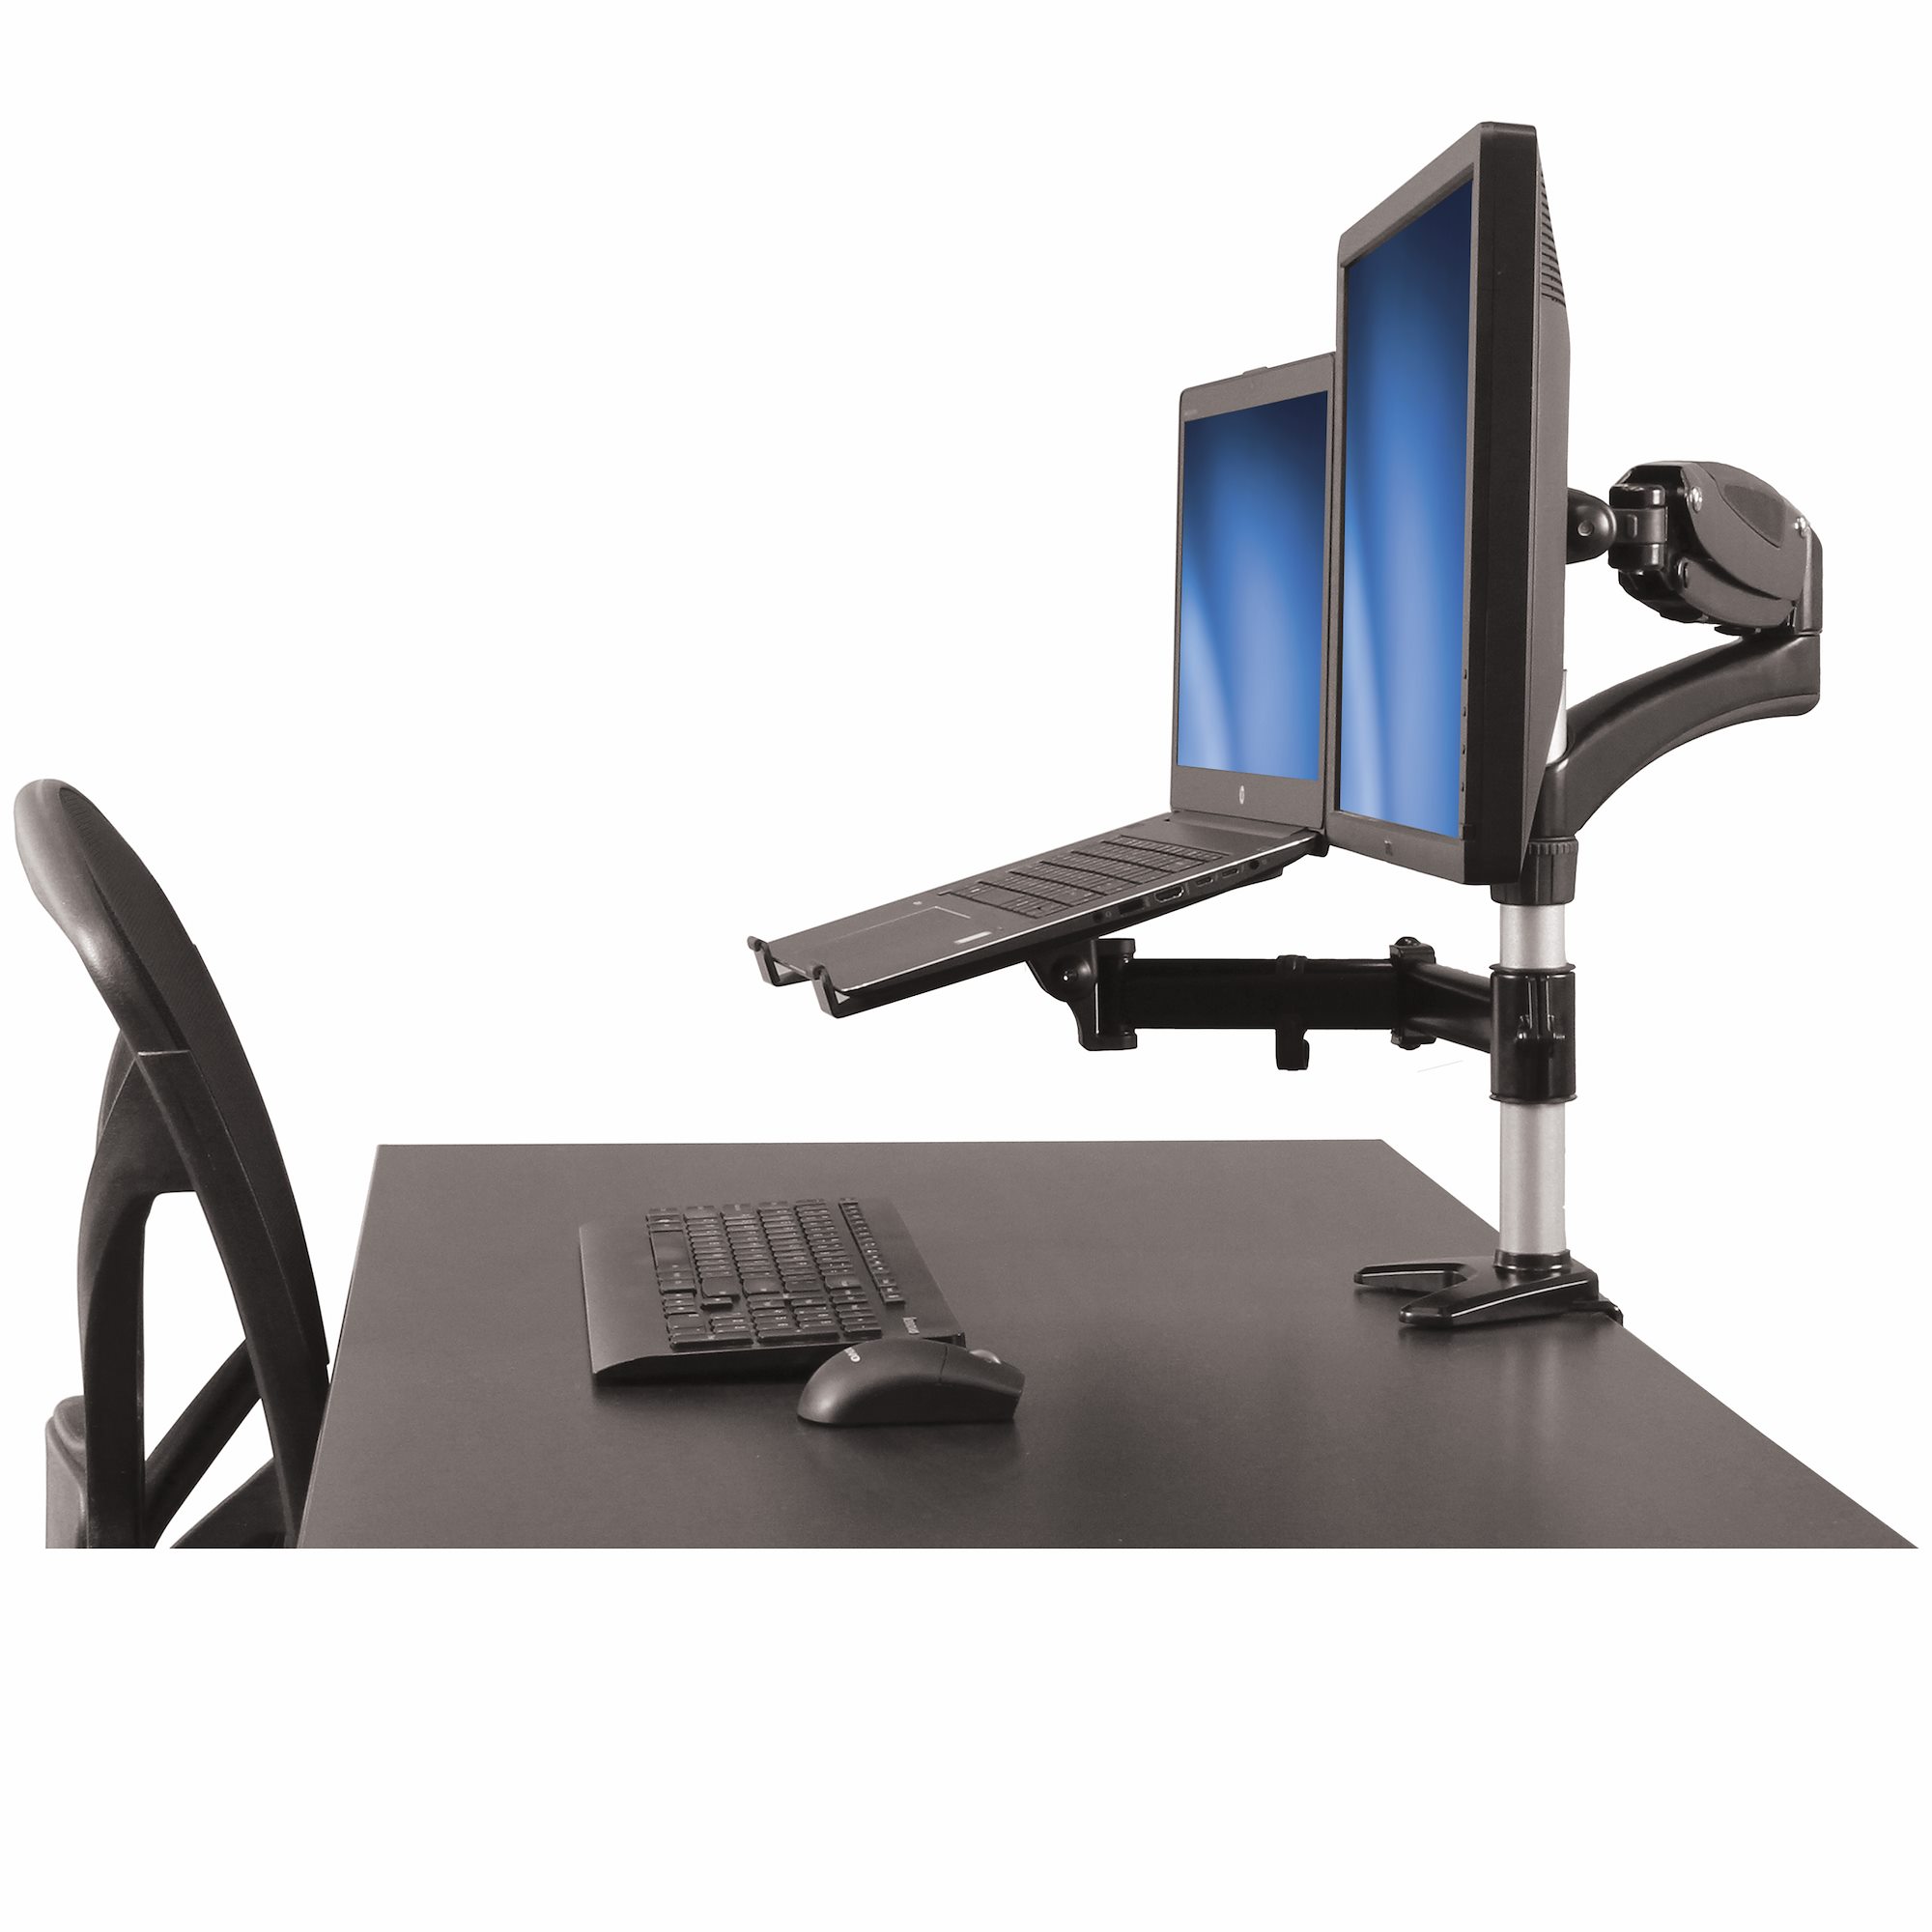 FULL MOTION DUAL ARM LCD MONITOR DESK MOUNT BRACKET ARTICULATING UP DOWN IN OUT 